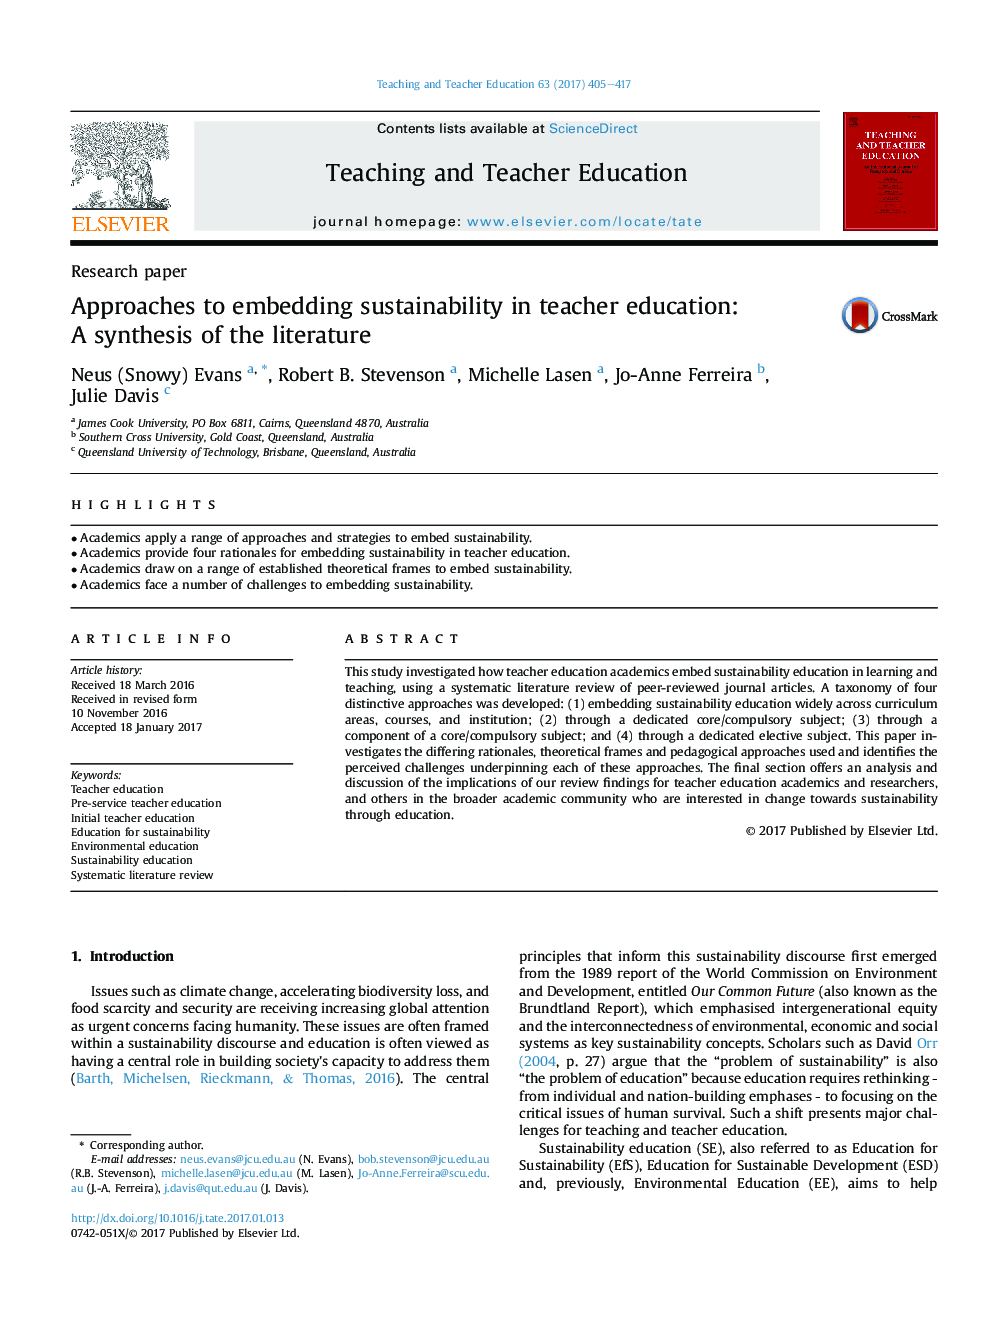 Approaches to embedding sustainability in teacher education: AÂ synthesis of the literature